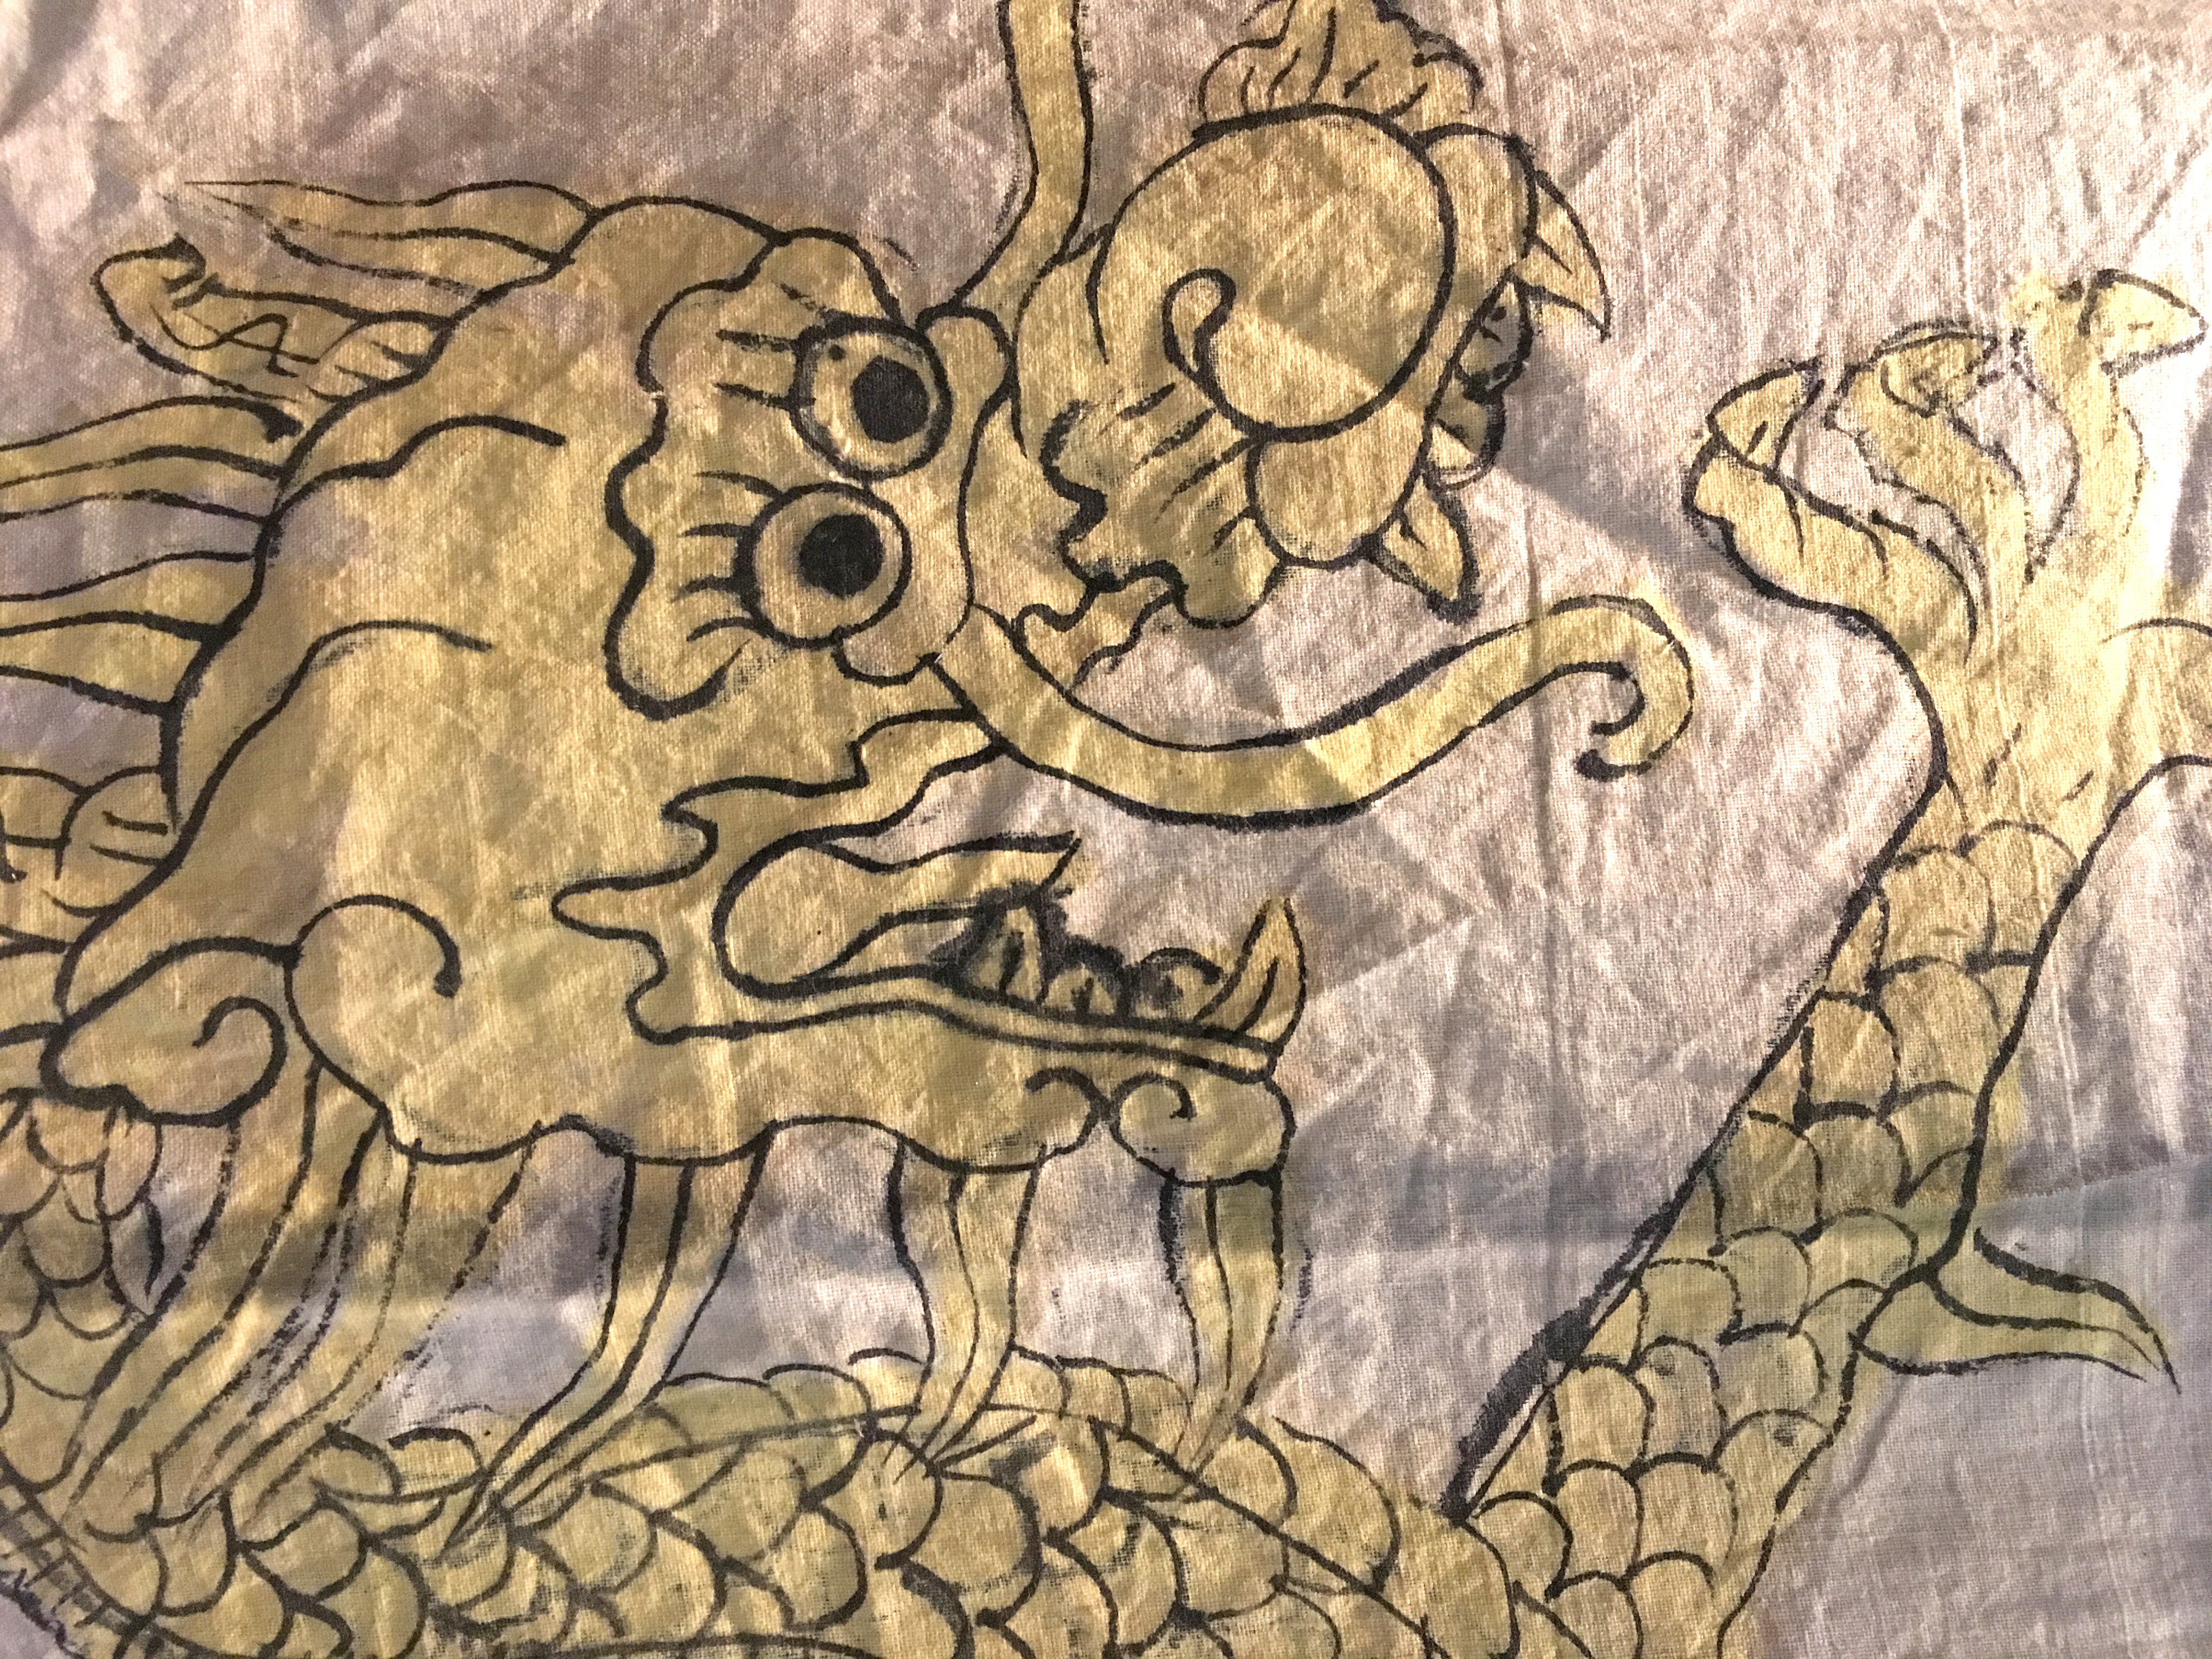 This pennant is decorated with a dragon, which symbolises strength, goodness and the ability to change into something completely different.